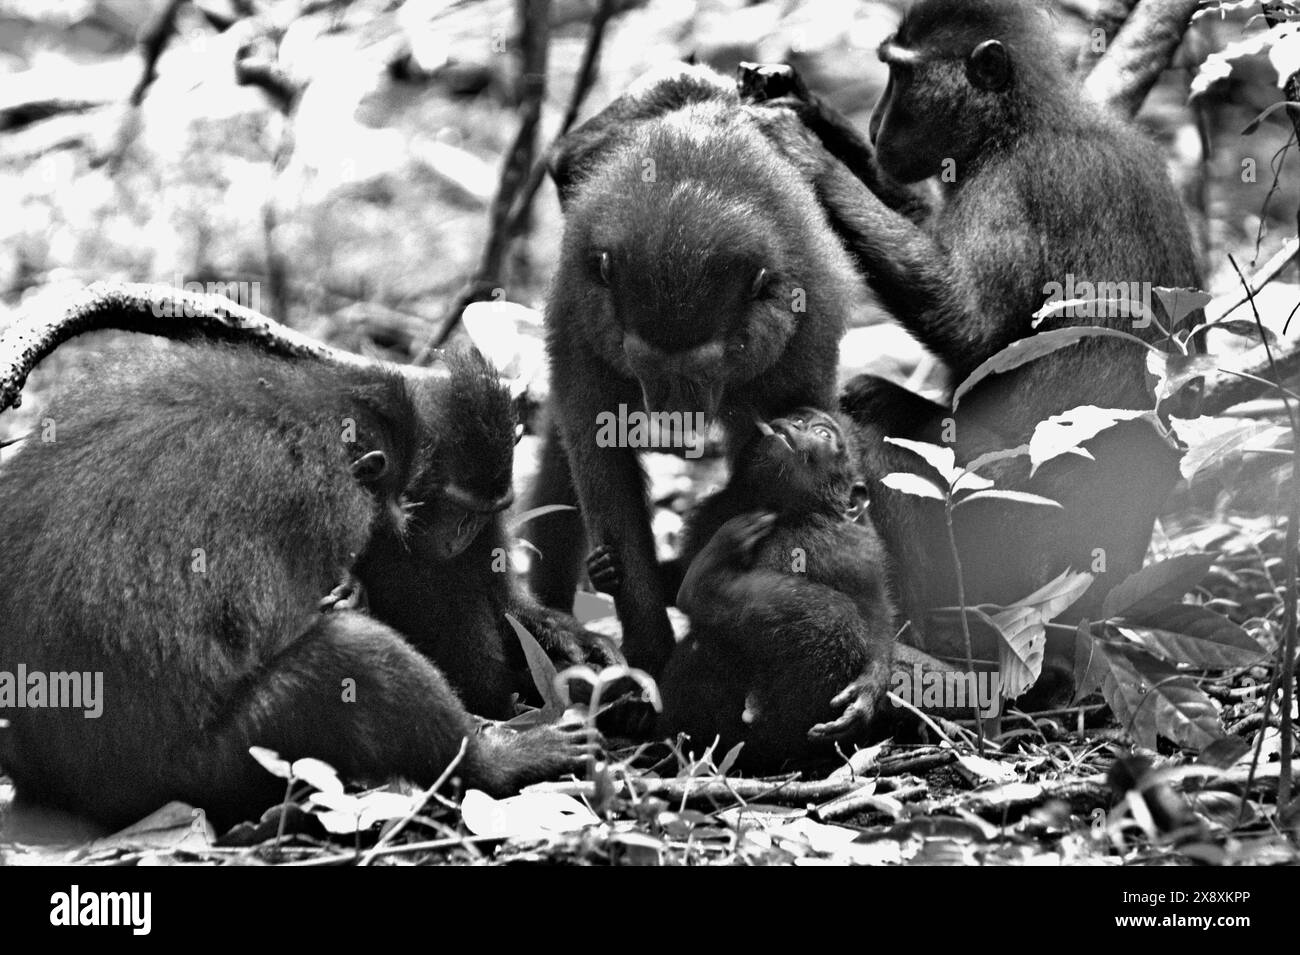 A group of Sulawesi black-crested macaque (Macaca nigra) in Tangkoko Nature Reserve, North Sulawesi, Indonesia. Stock Photo